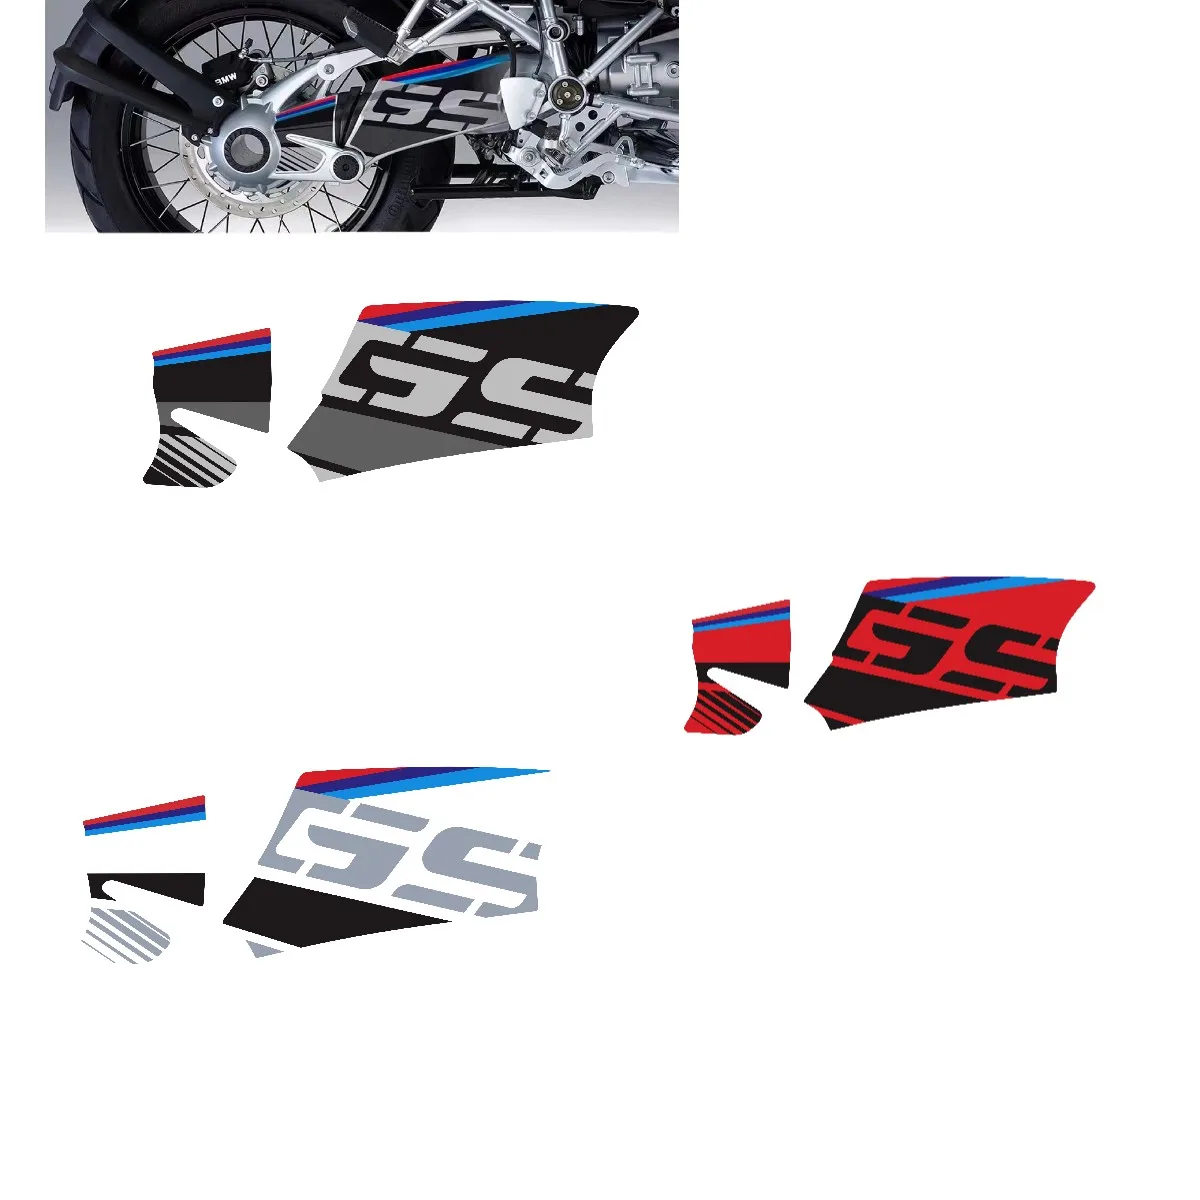 For BMW R1200 04-12 R1200GS Adv 04-13 3M Motorcycle Swing arm Decal Waterproof Rotating Shaft Swingarm Stickers